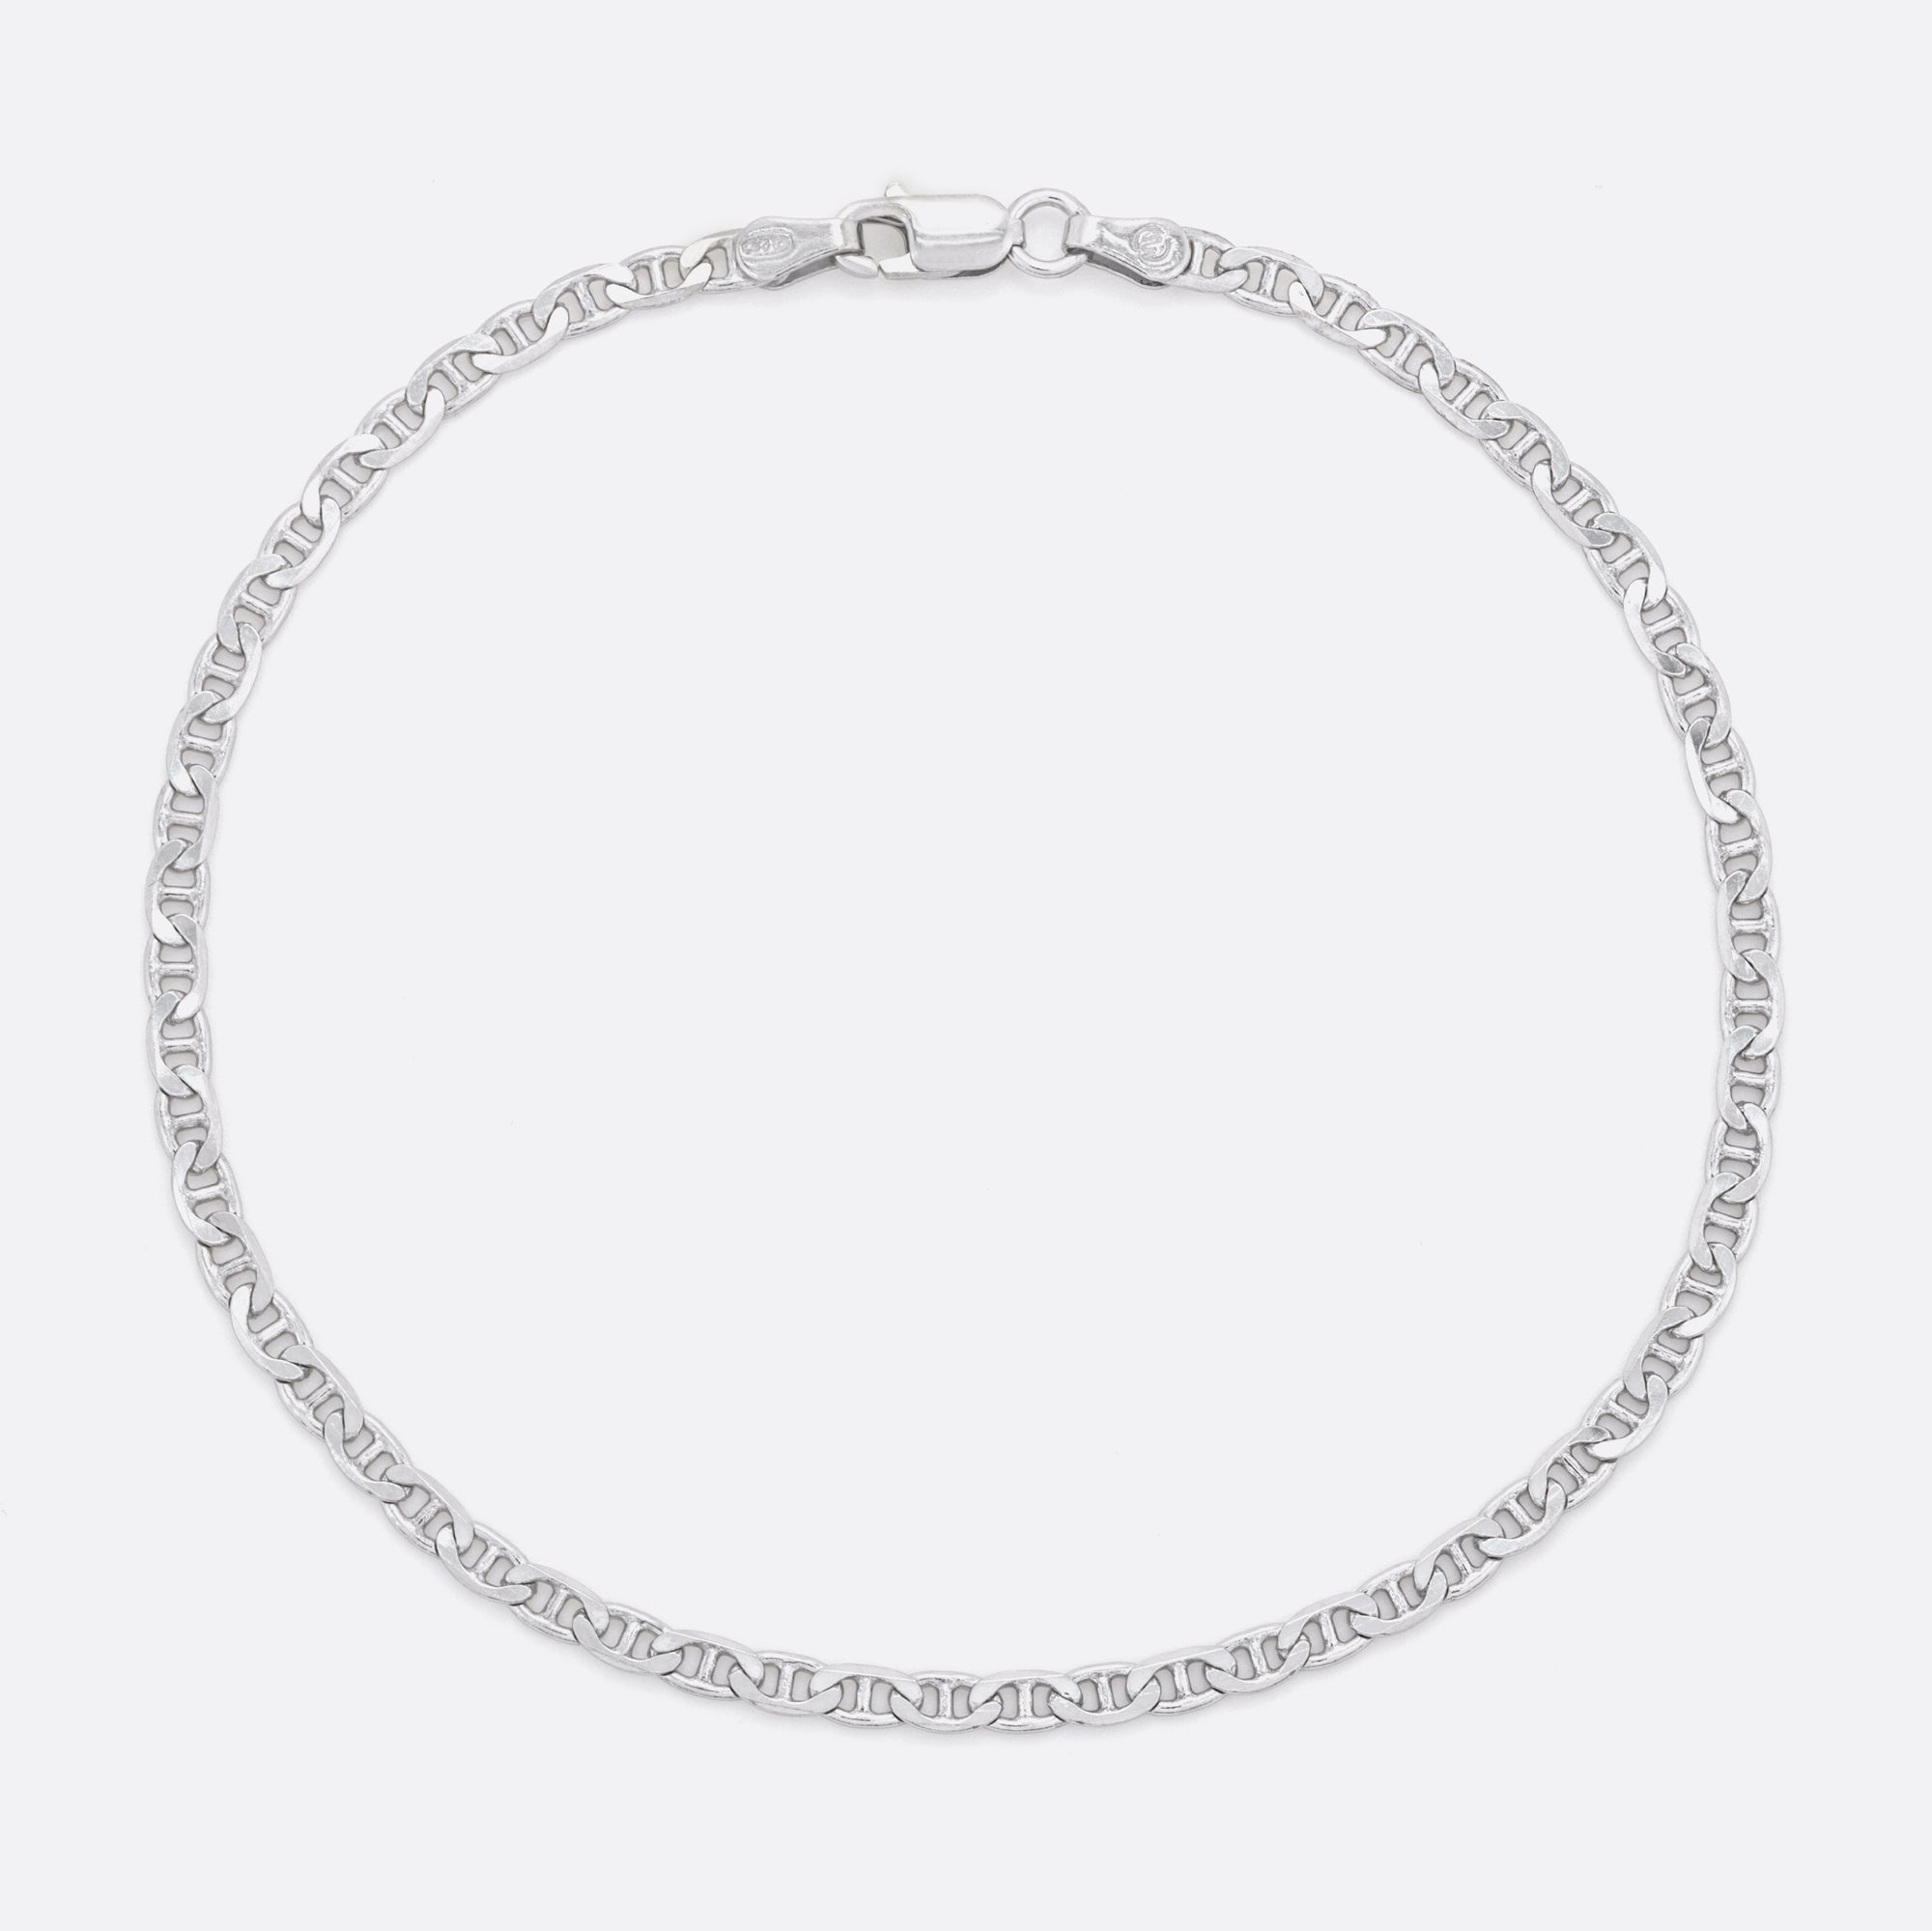 9.5 inch sterling silver anklet chain